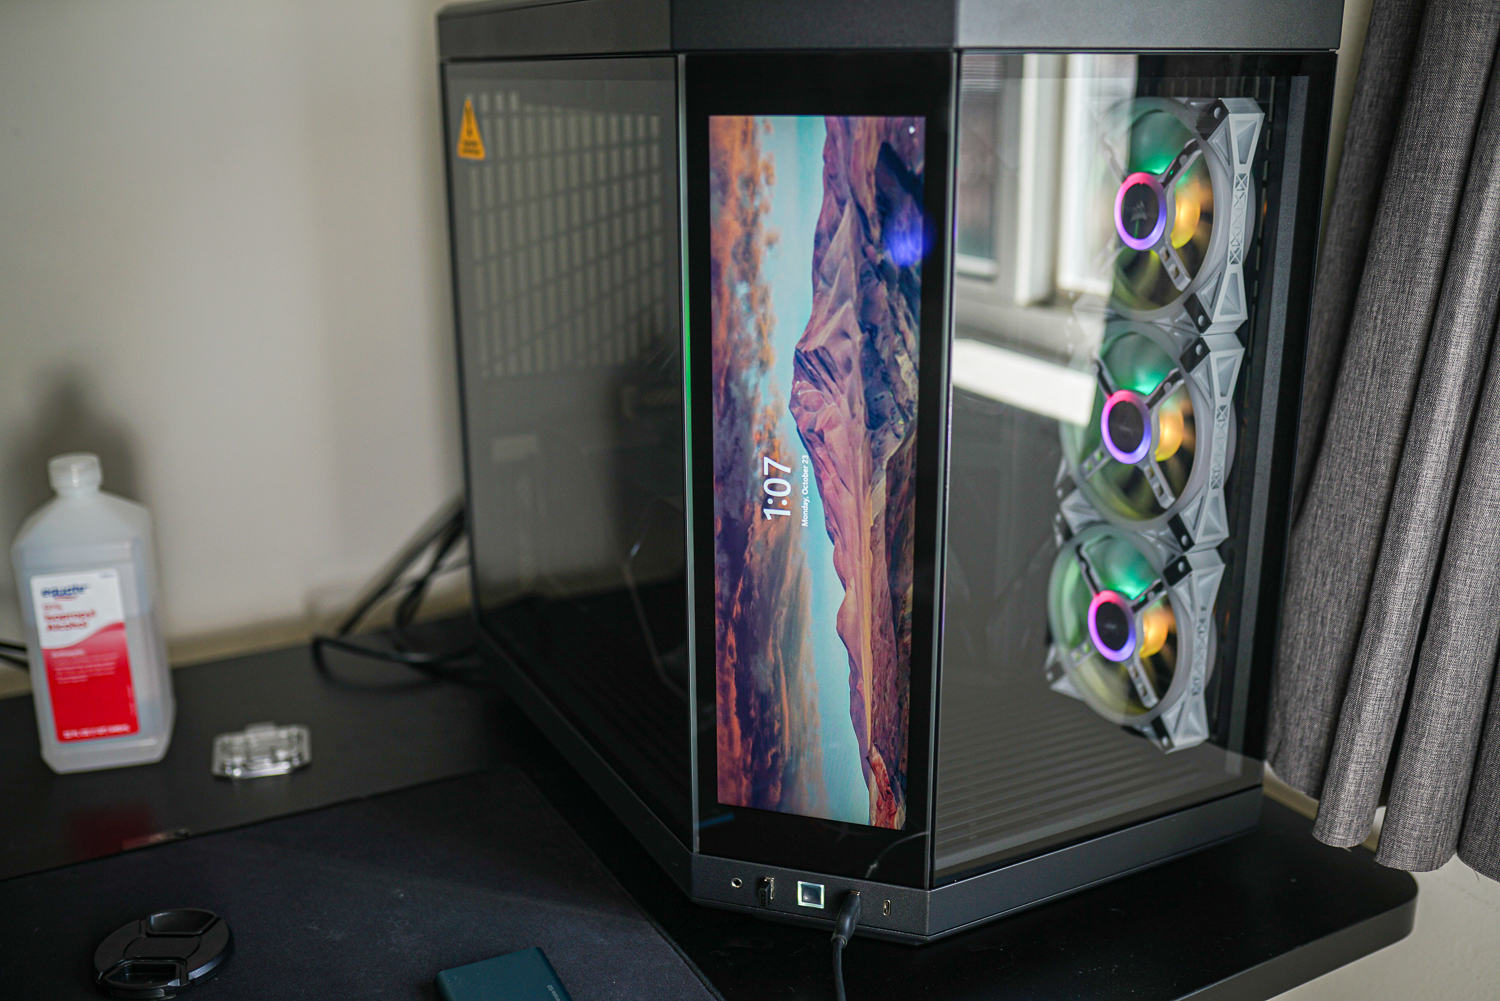 PC Case With a 4K Touch Screen? Hyte Y70 Touch ULTIMATE Unboxing Build and  Review 